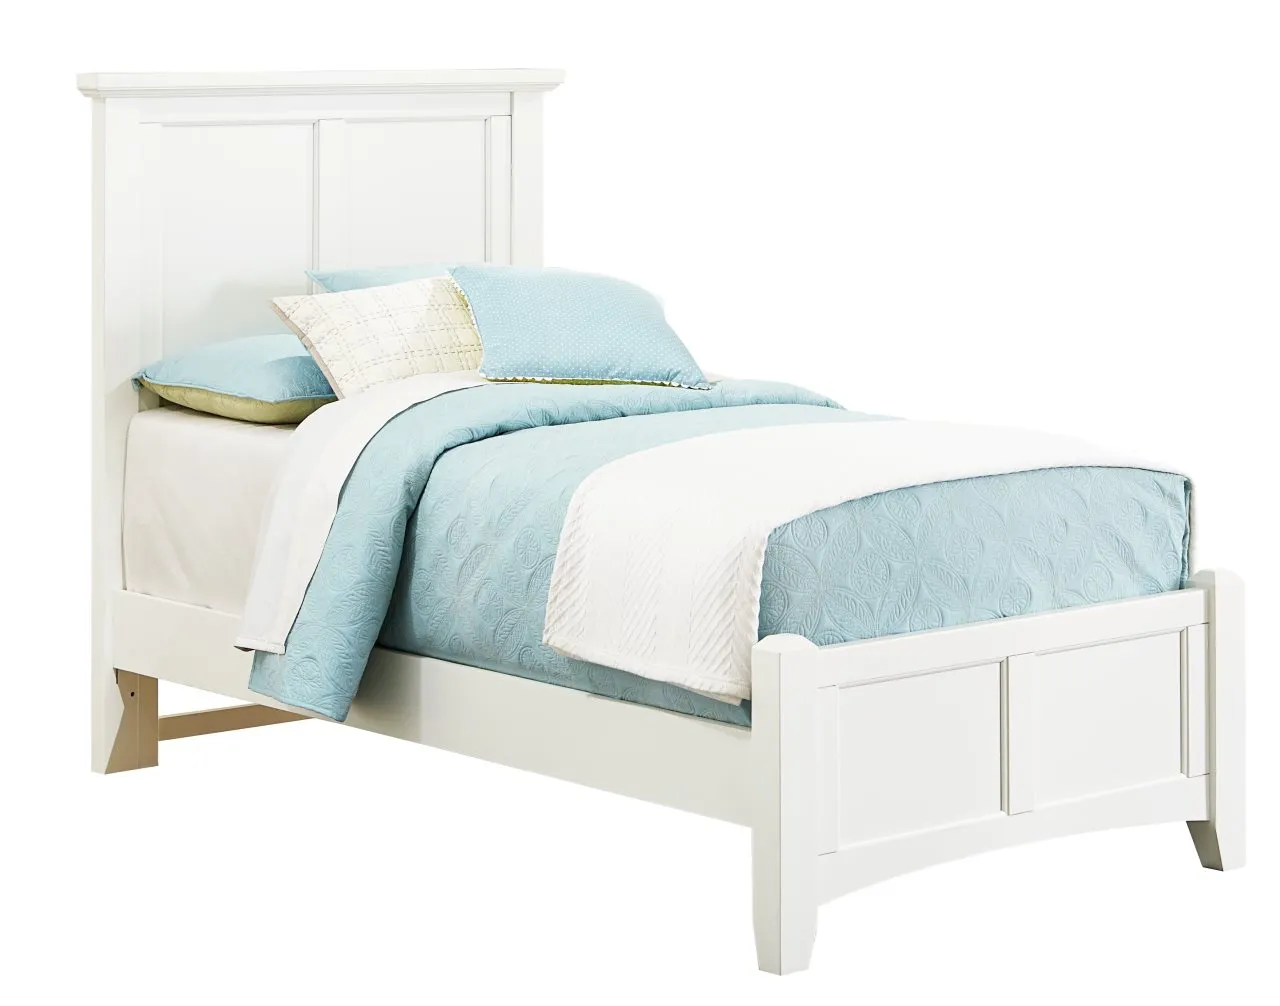 BONANZA MANSION BED HEADBOARD ONLY IN WHITE - TWIN